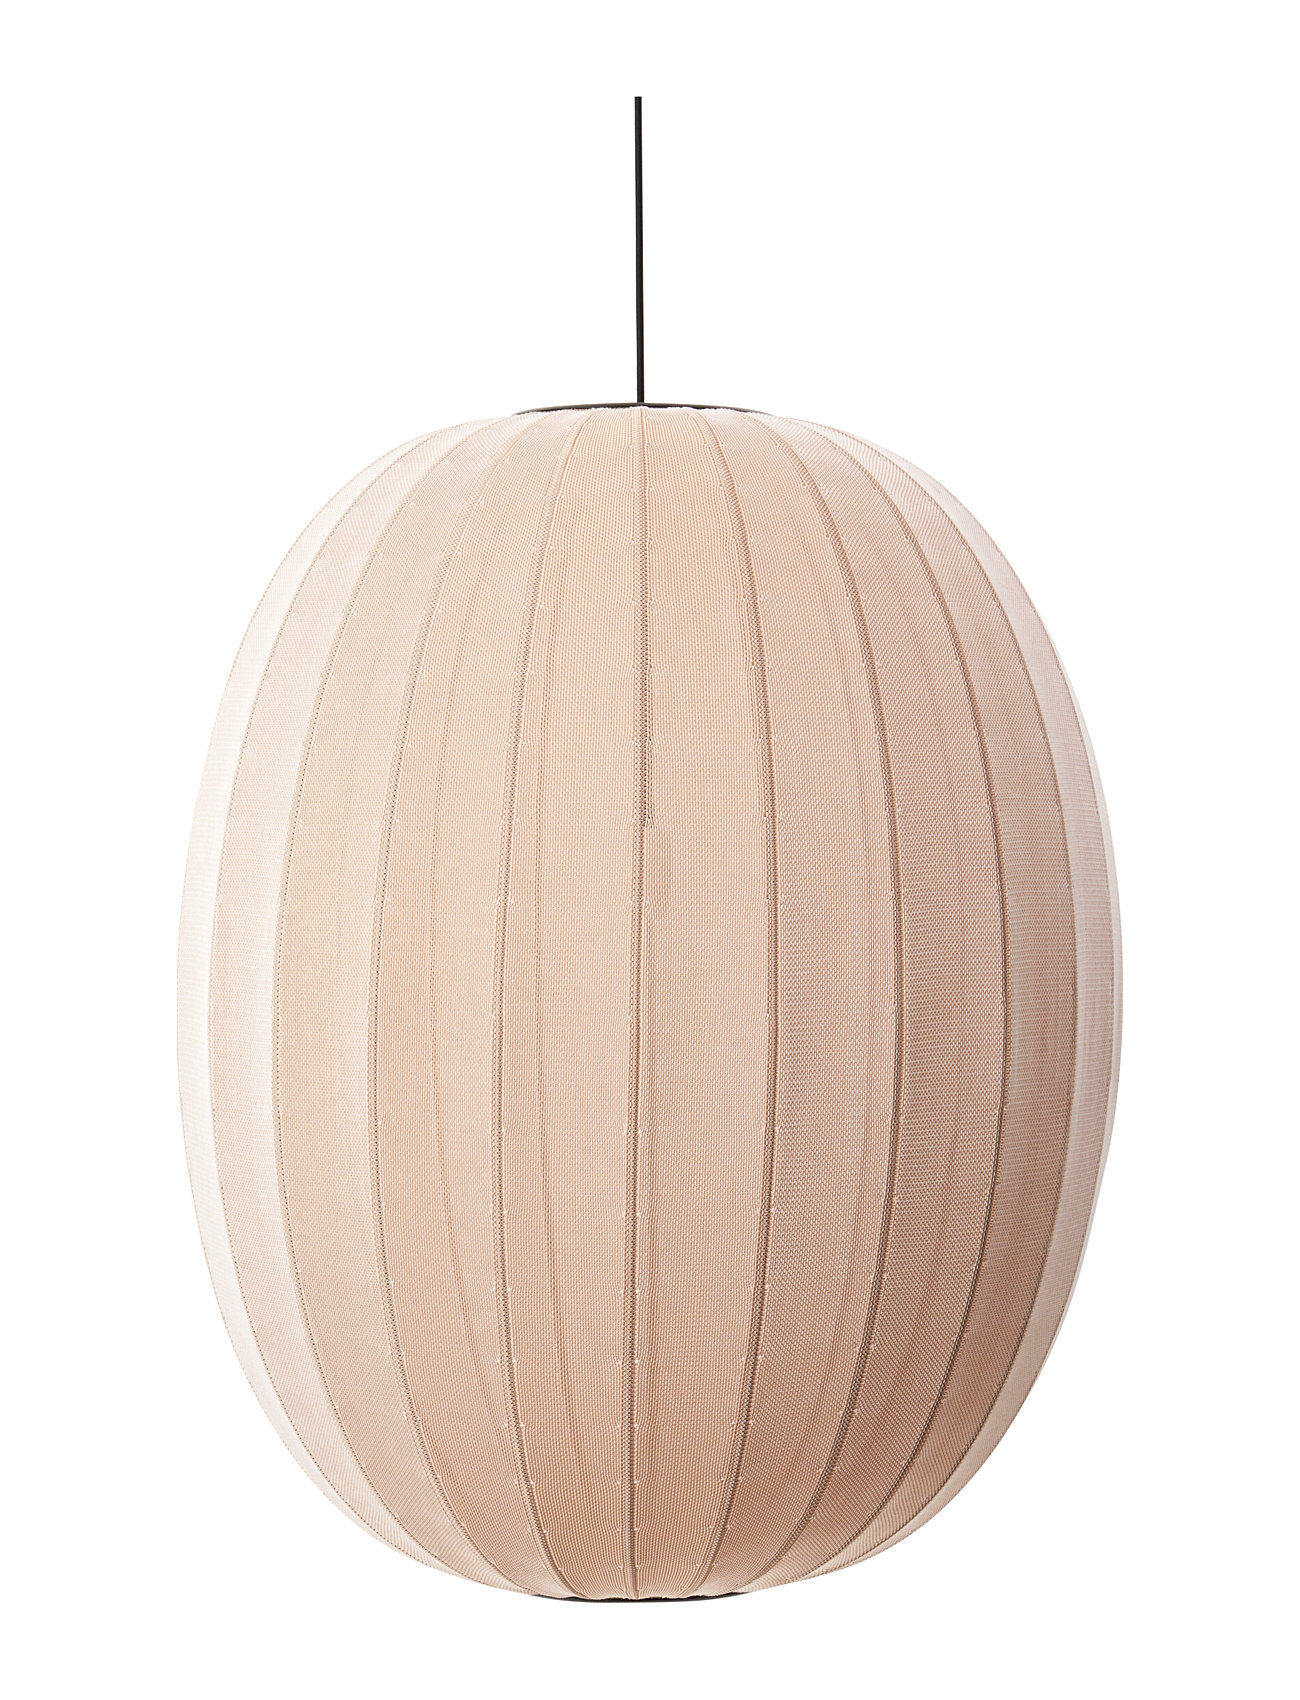 Knit-Wit 65 High Oval Pendant Home Lighting Lamps Ceiling Lamps Pendant Lamps Beige Made By Hand